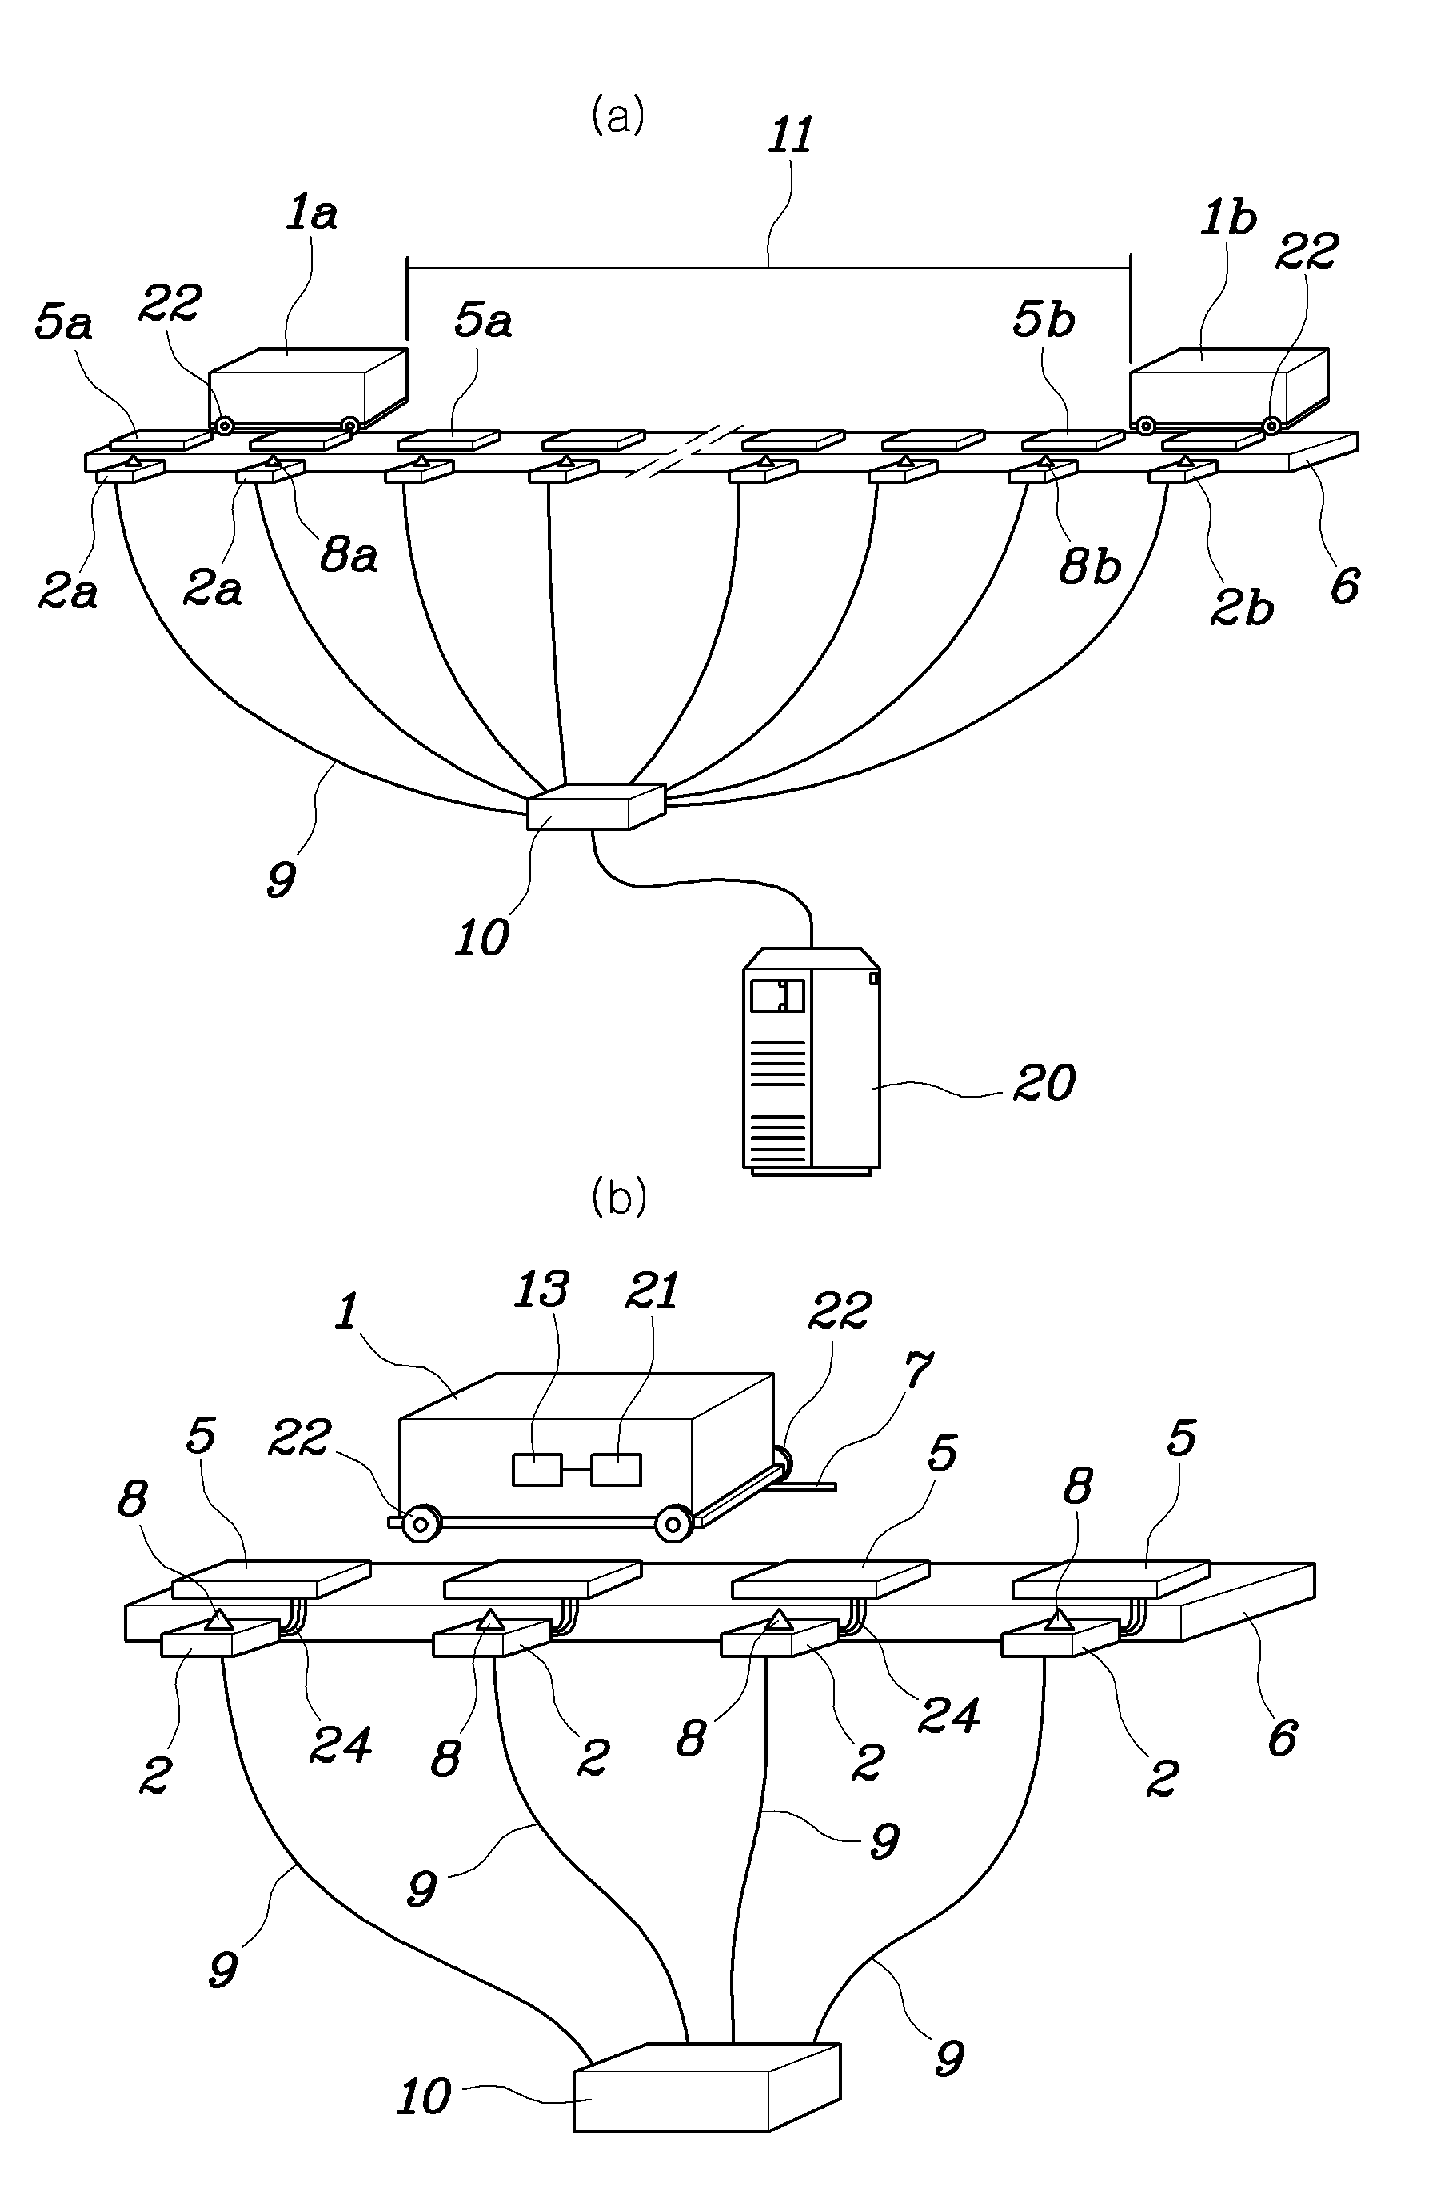 Method for Platooning of Vehicles in an Automated Vehicle System